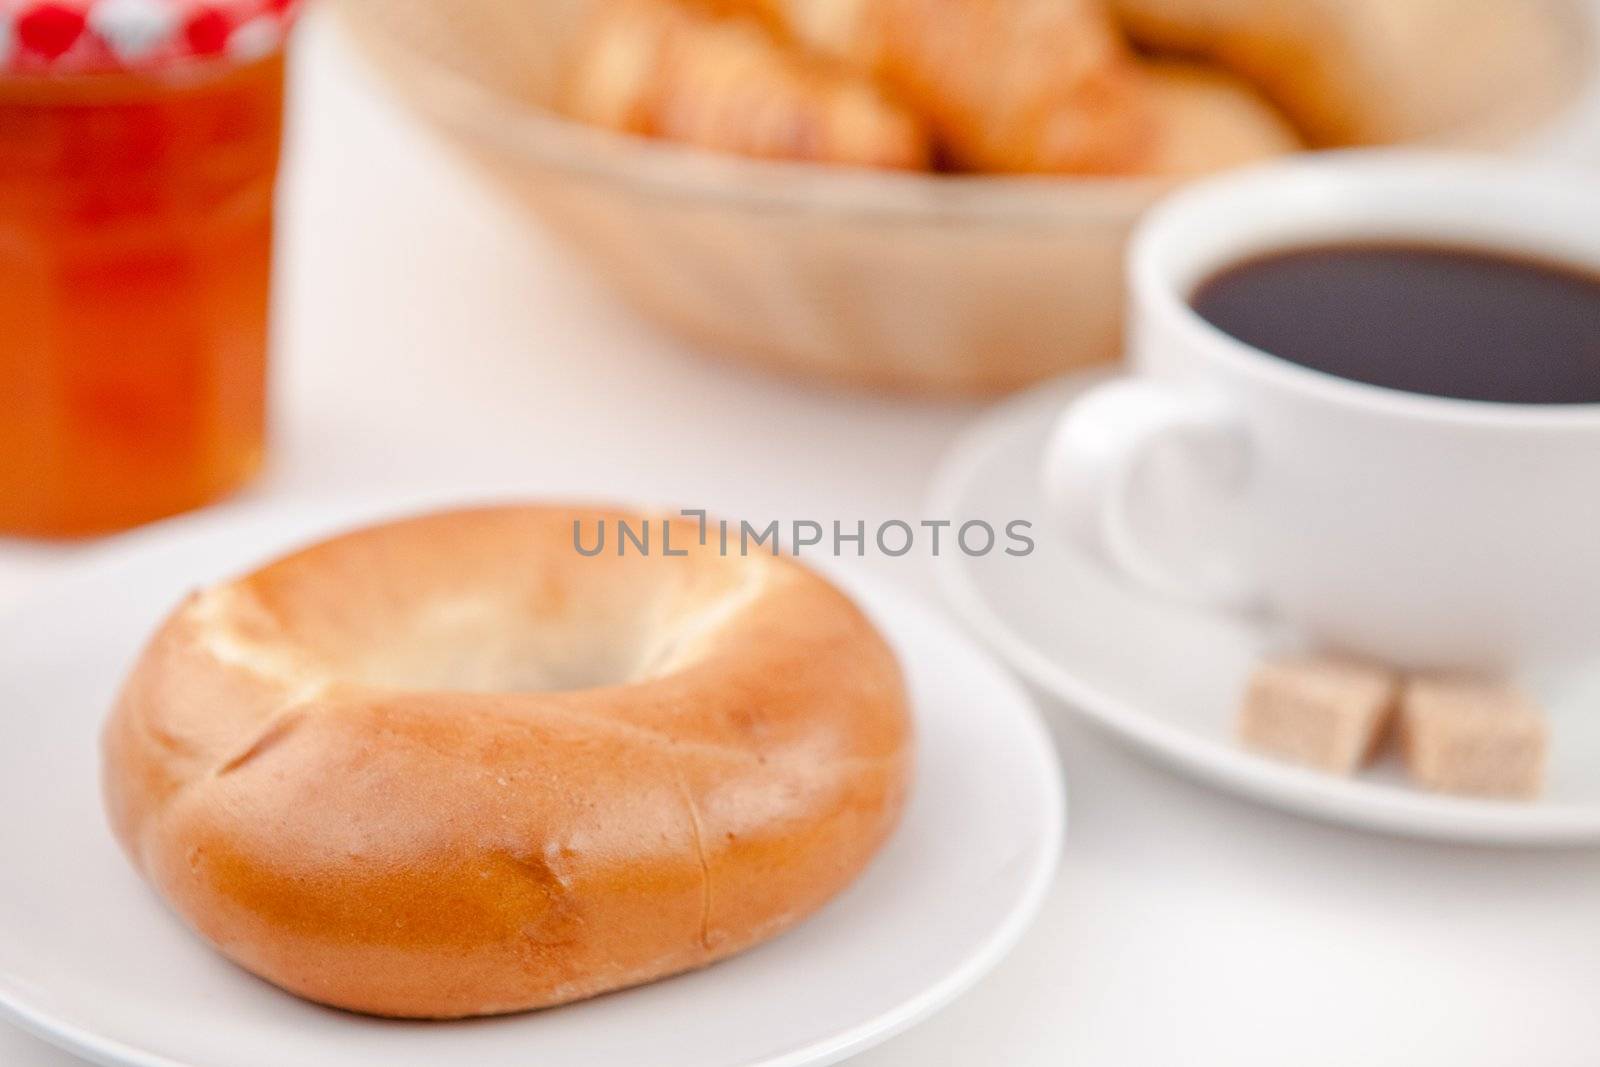 Doughnut and a cup of coffee on white plates with sugar and milk against a white background